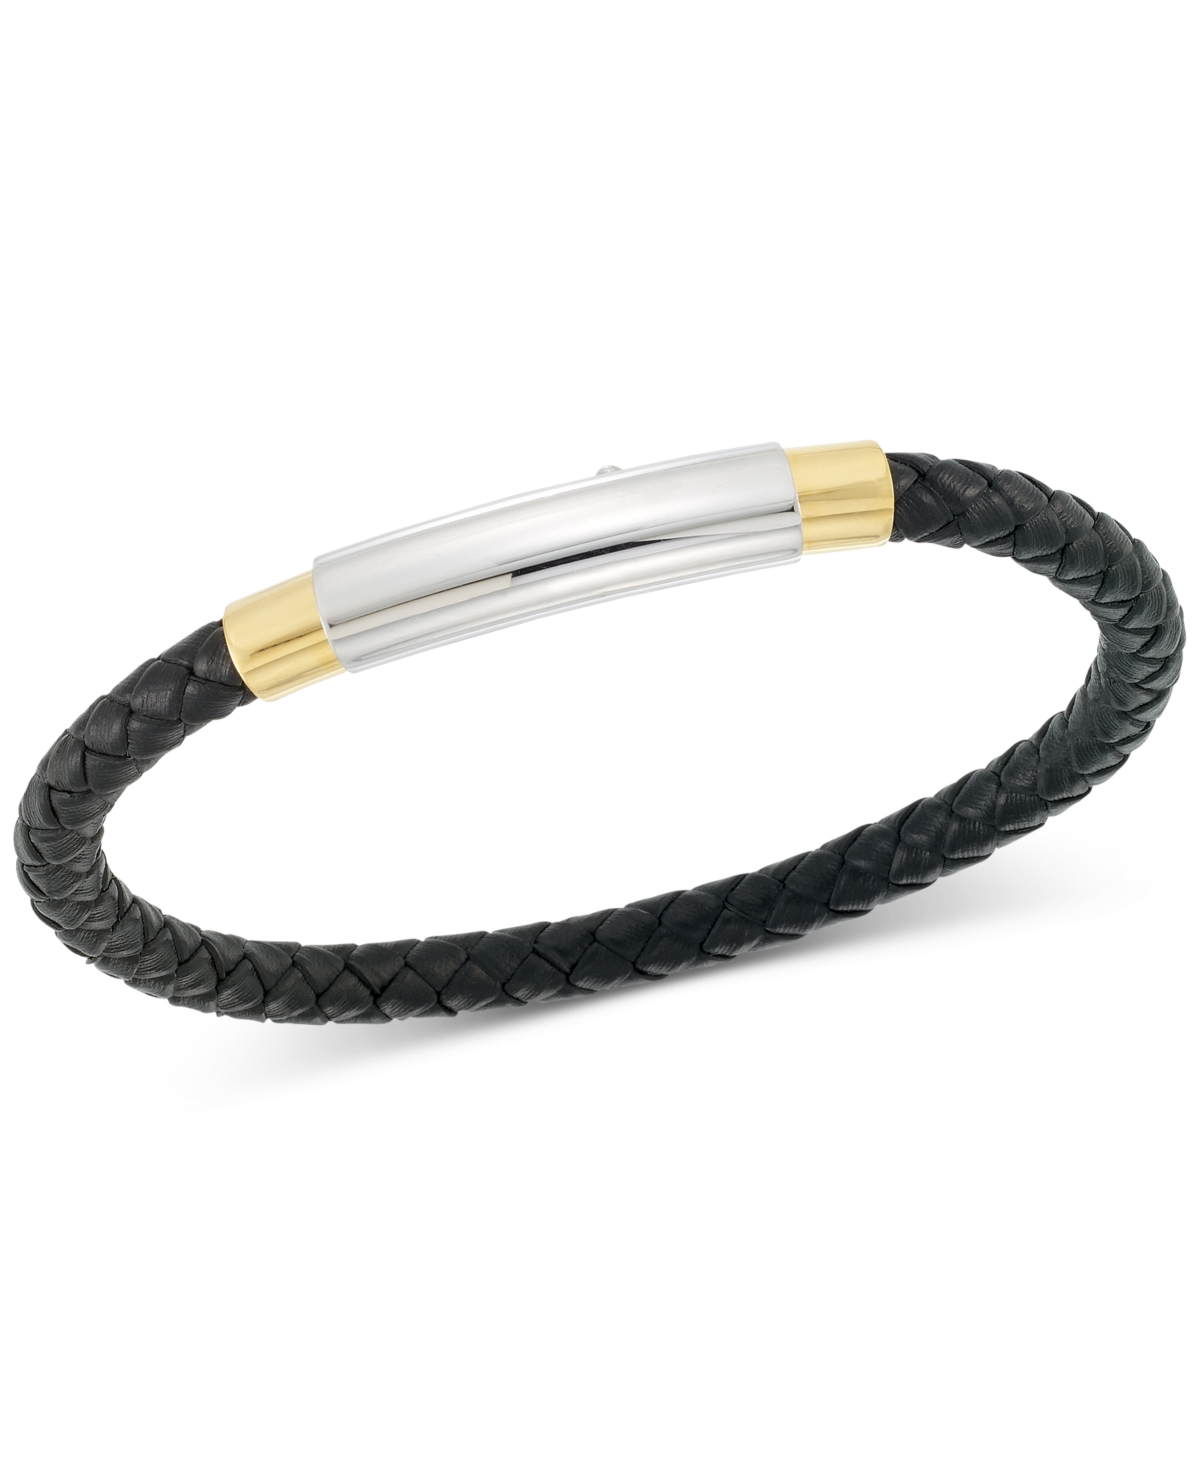 Smith Two-Tone Woven Black Leather Bracelet in Stainless Steel & Yellow Ion-Plate - Black